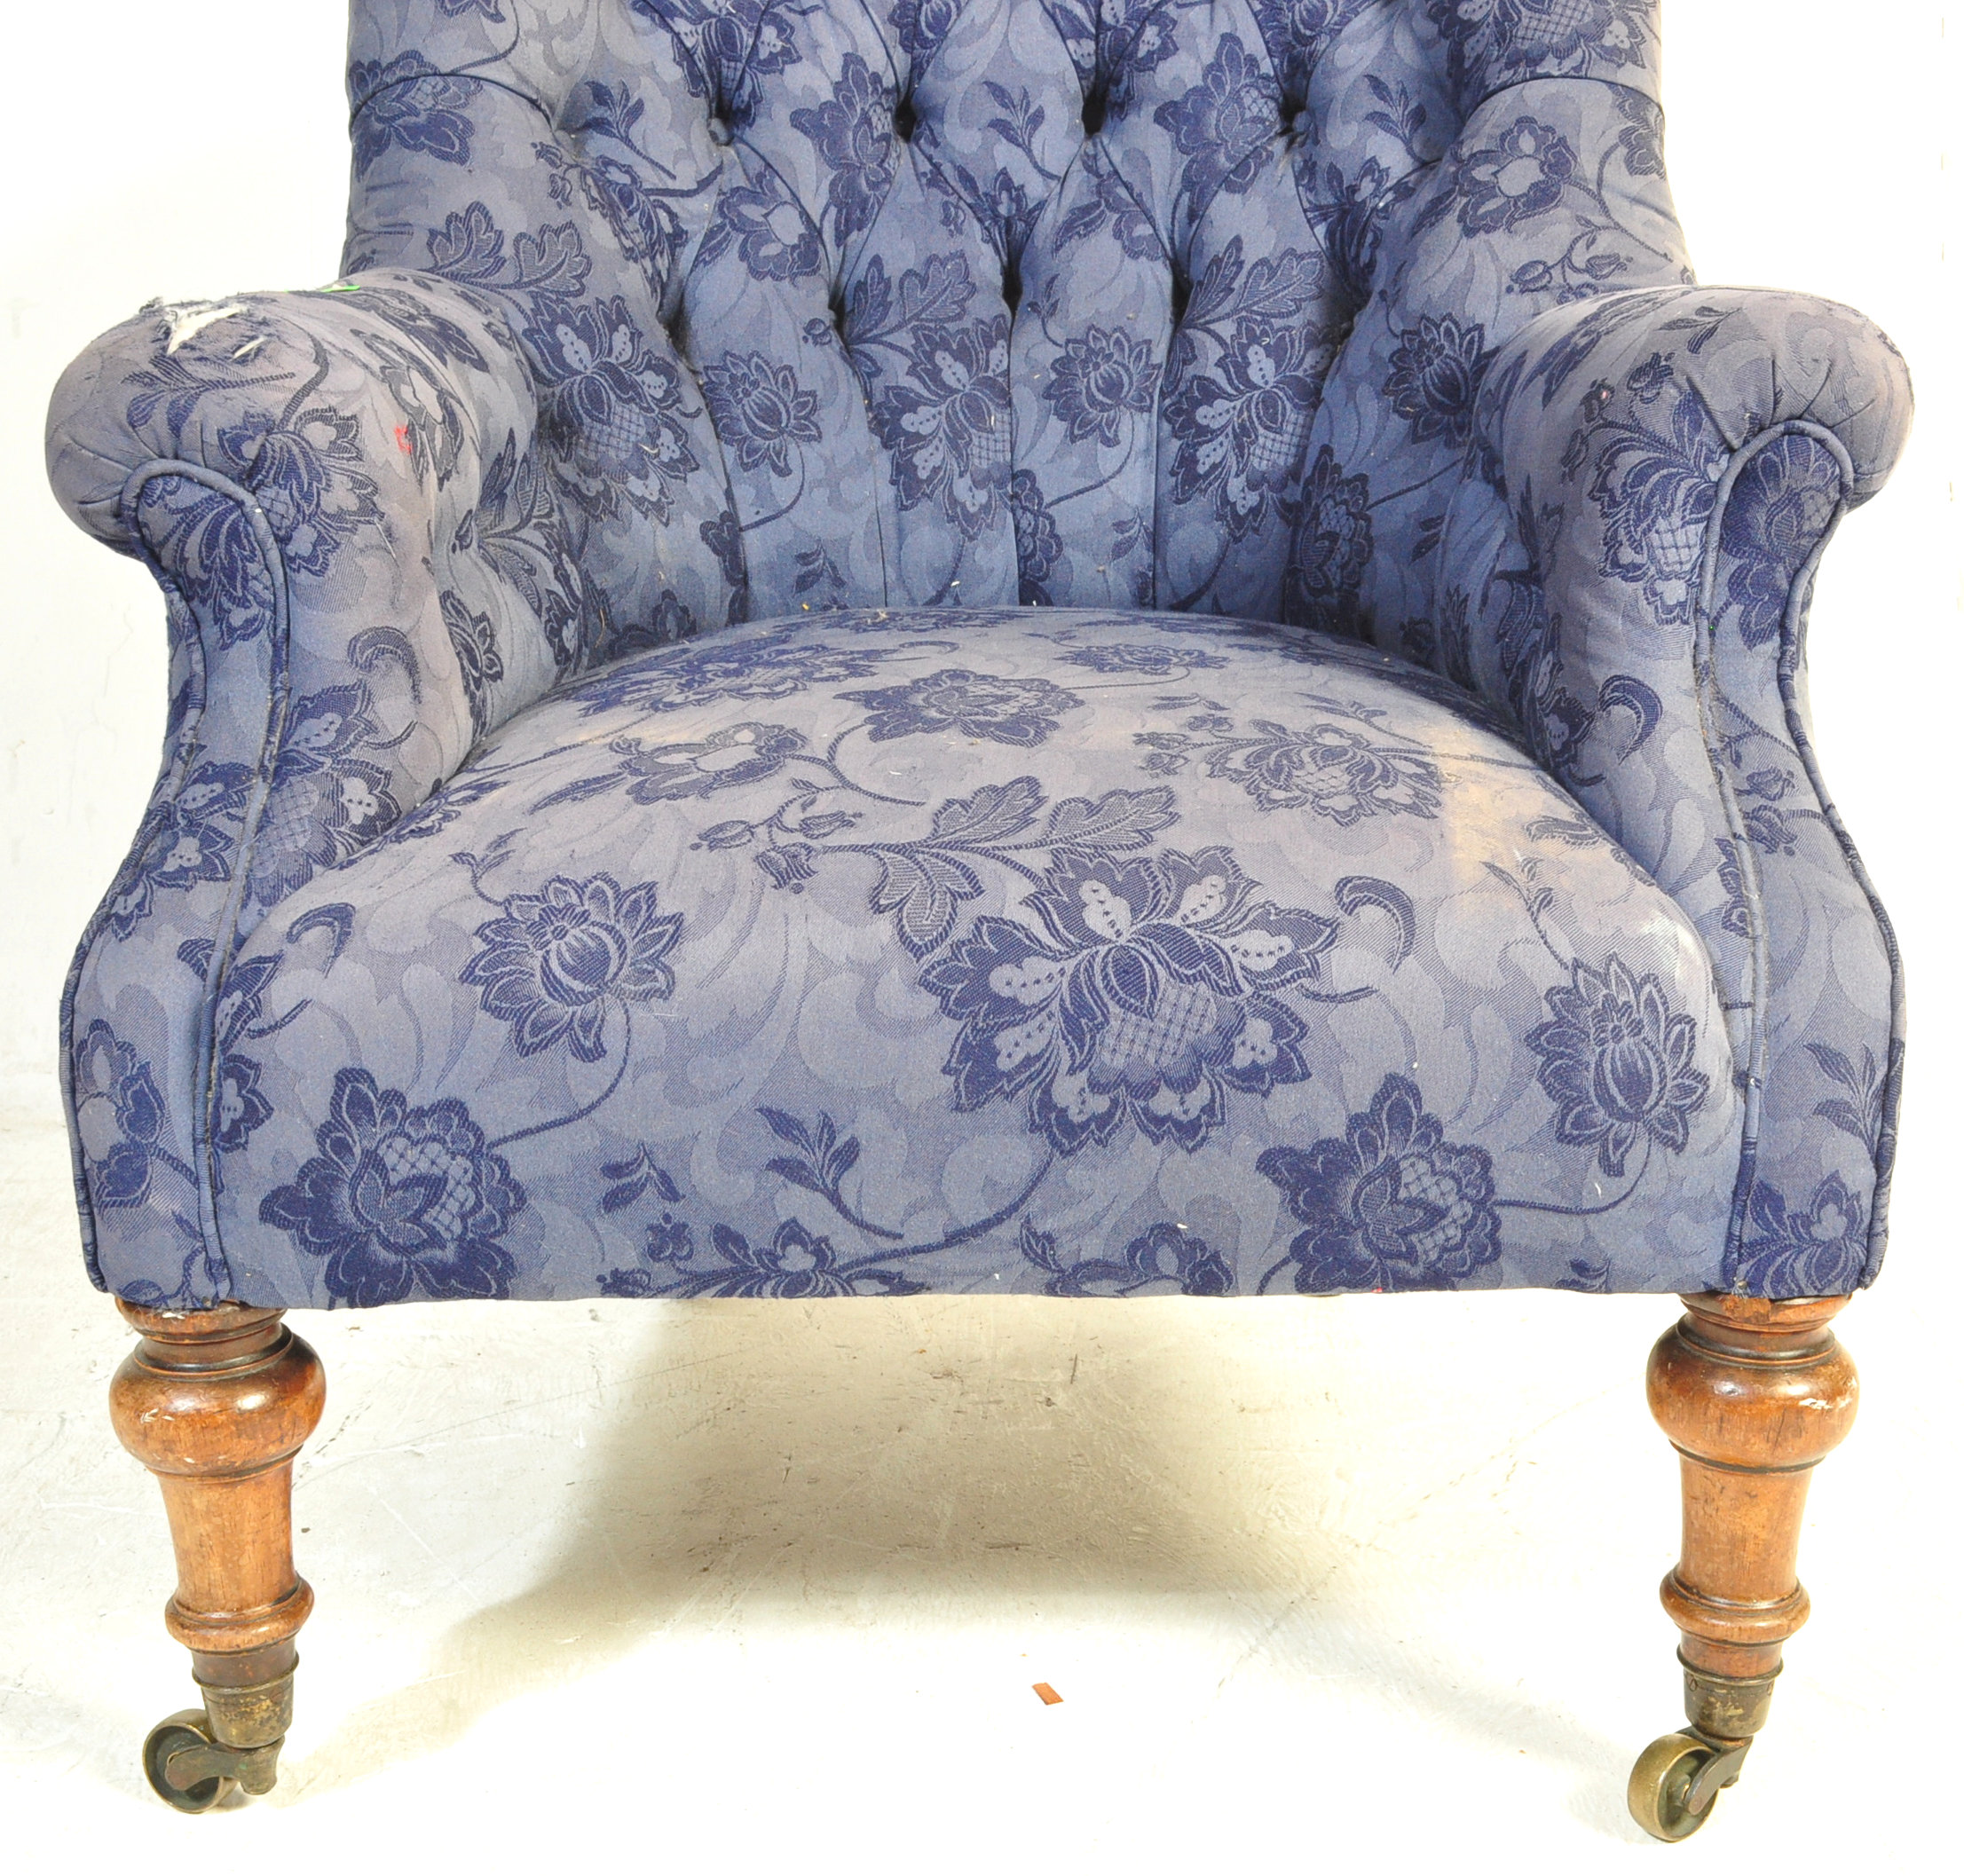 VICTORIAN 19TH CENTURY UPHOLSTERED ARMCHAIR - Image 4 of 6